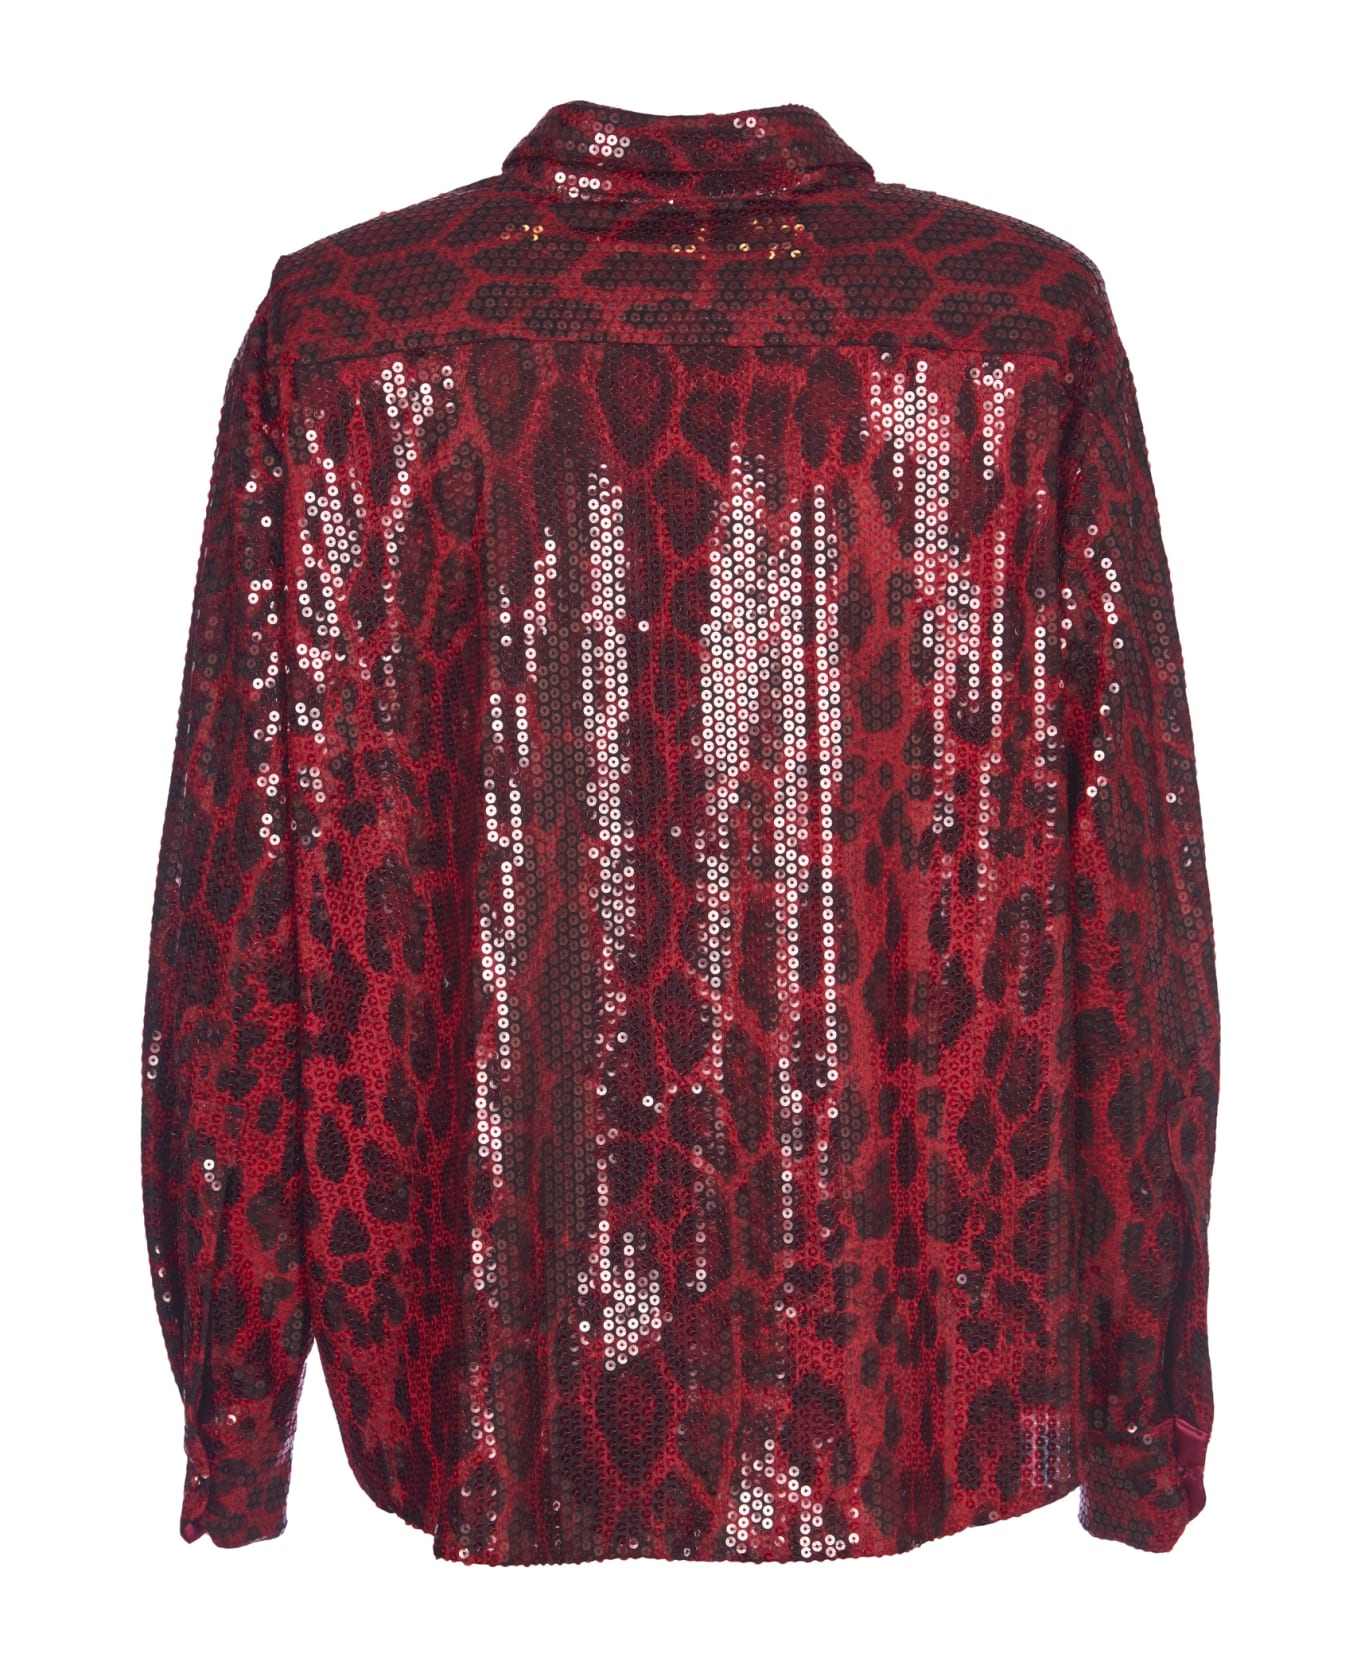 NEW ARRIVALS Sequins Over Shirt - Red 